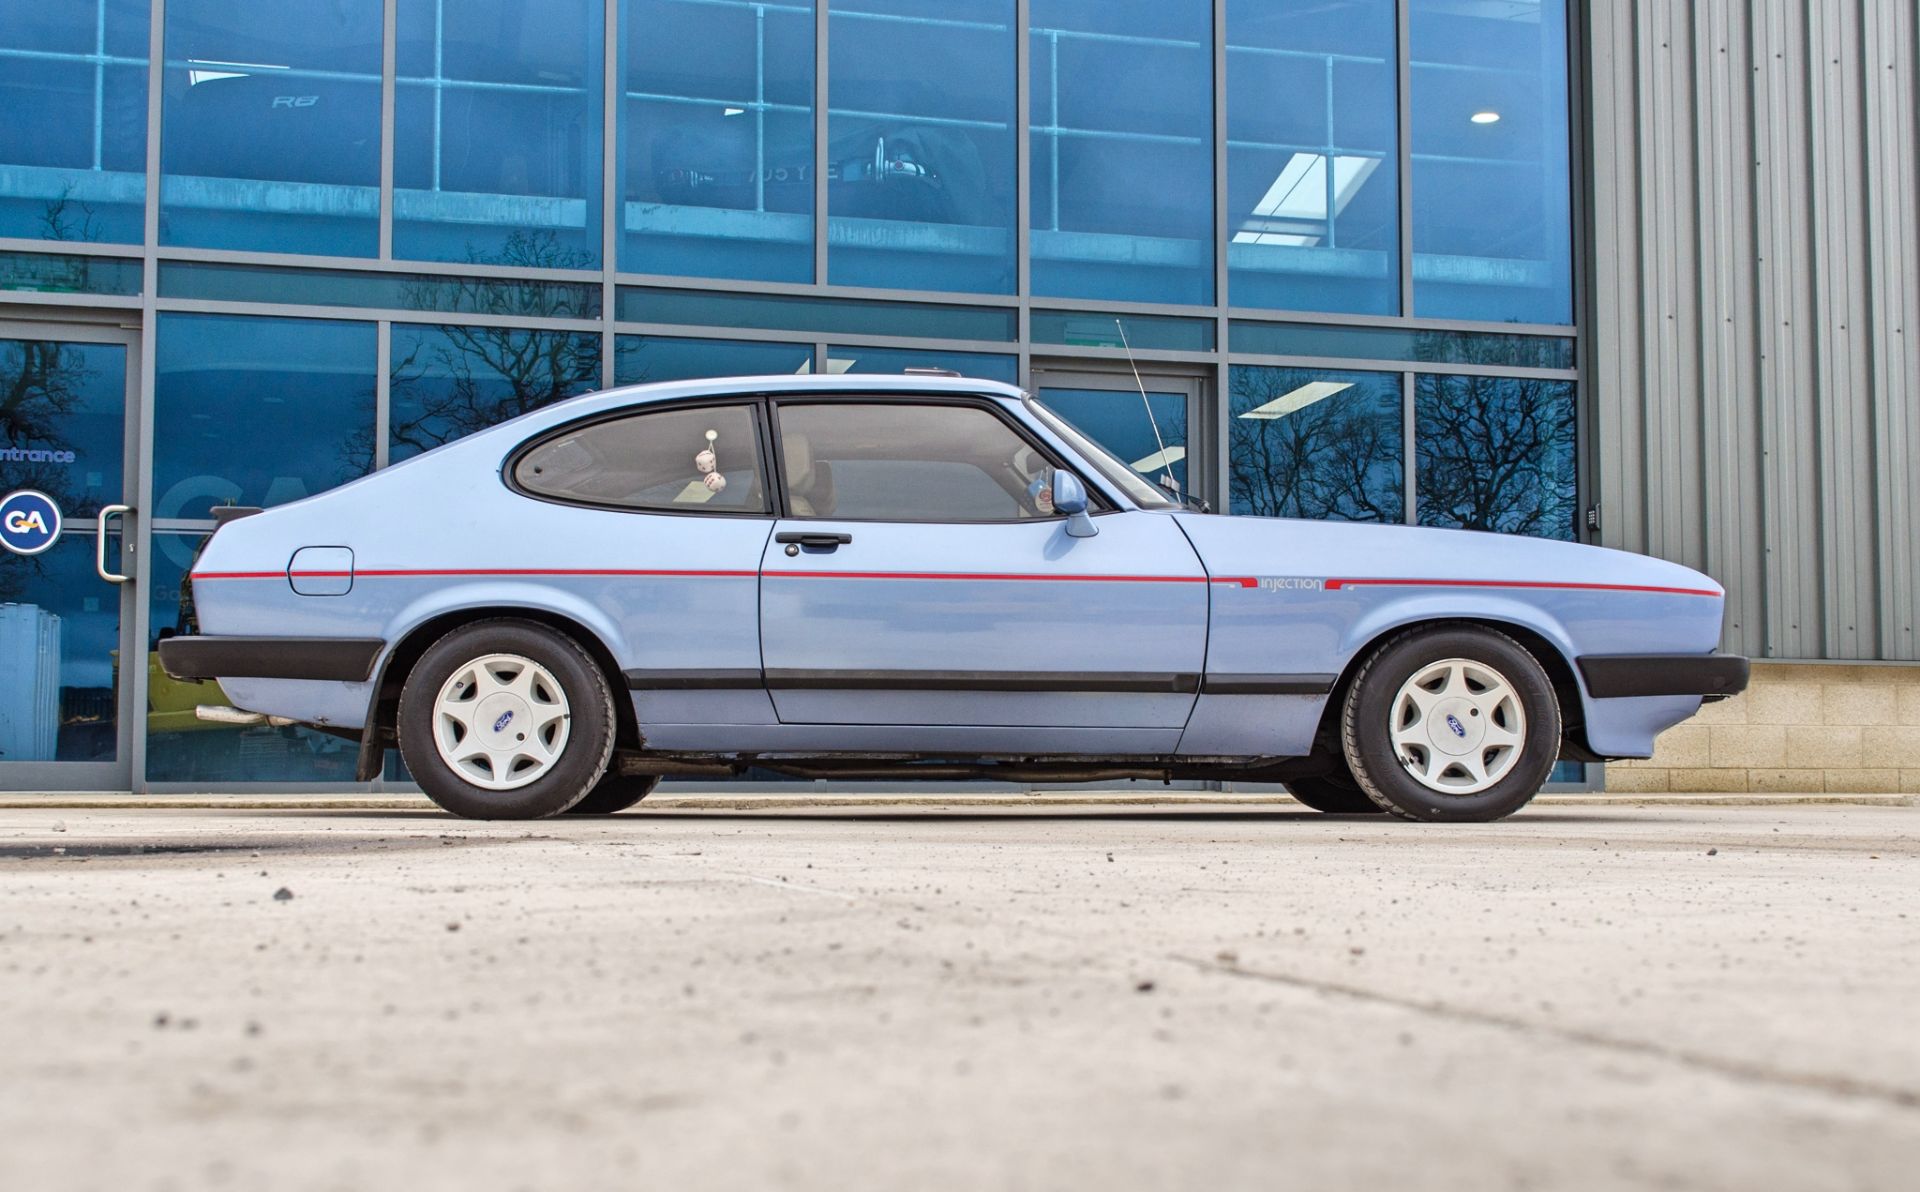 1986 Ford Capri 2.8 Injection Special 3 door coupe - Image 13 of 56